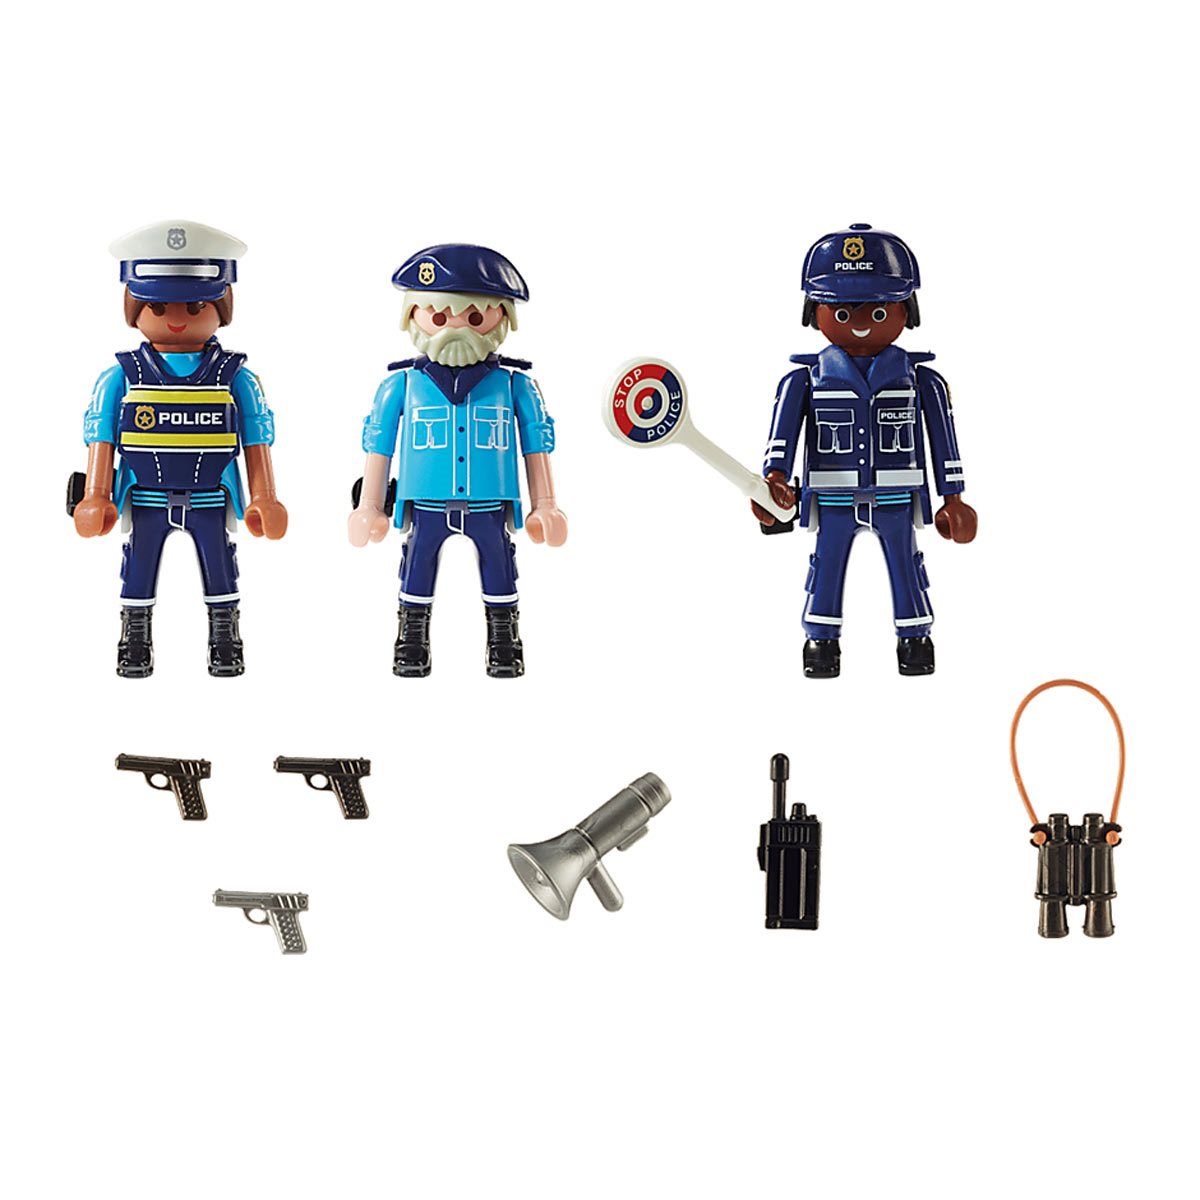 Playmobil Police Emergency Squad Car - A2Z Science & Learning Toy Store